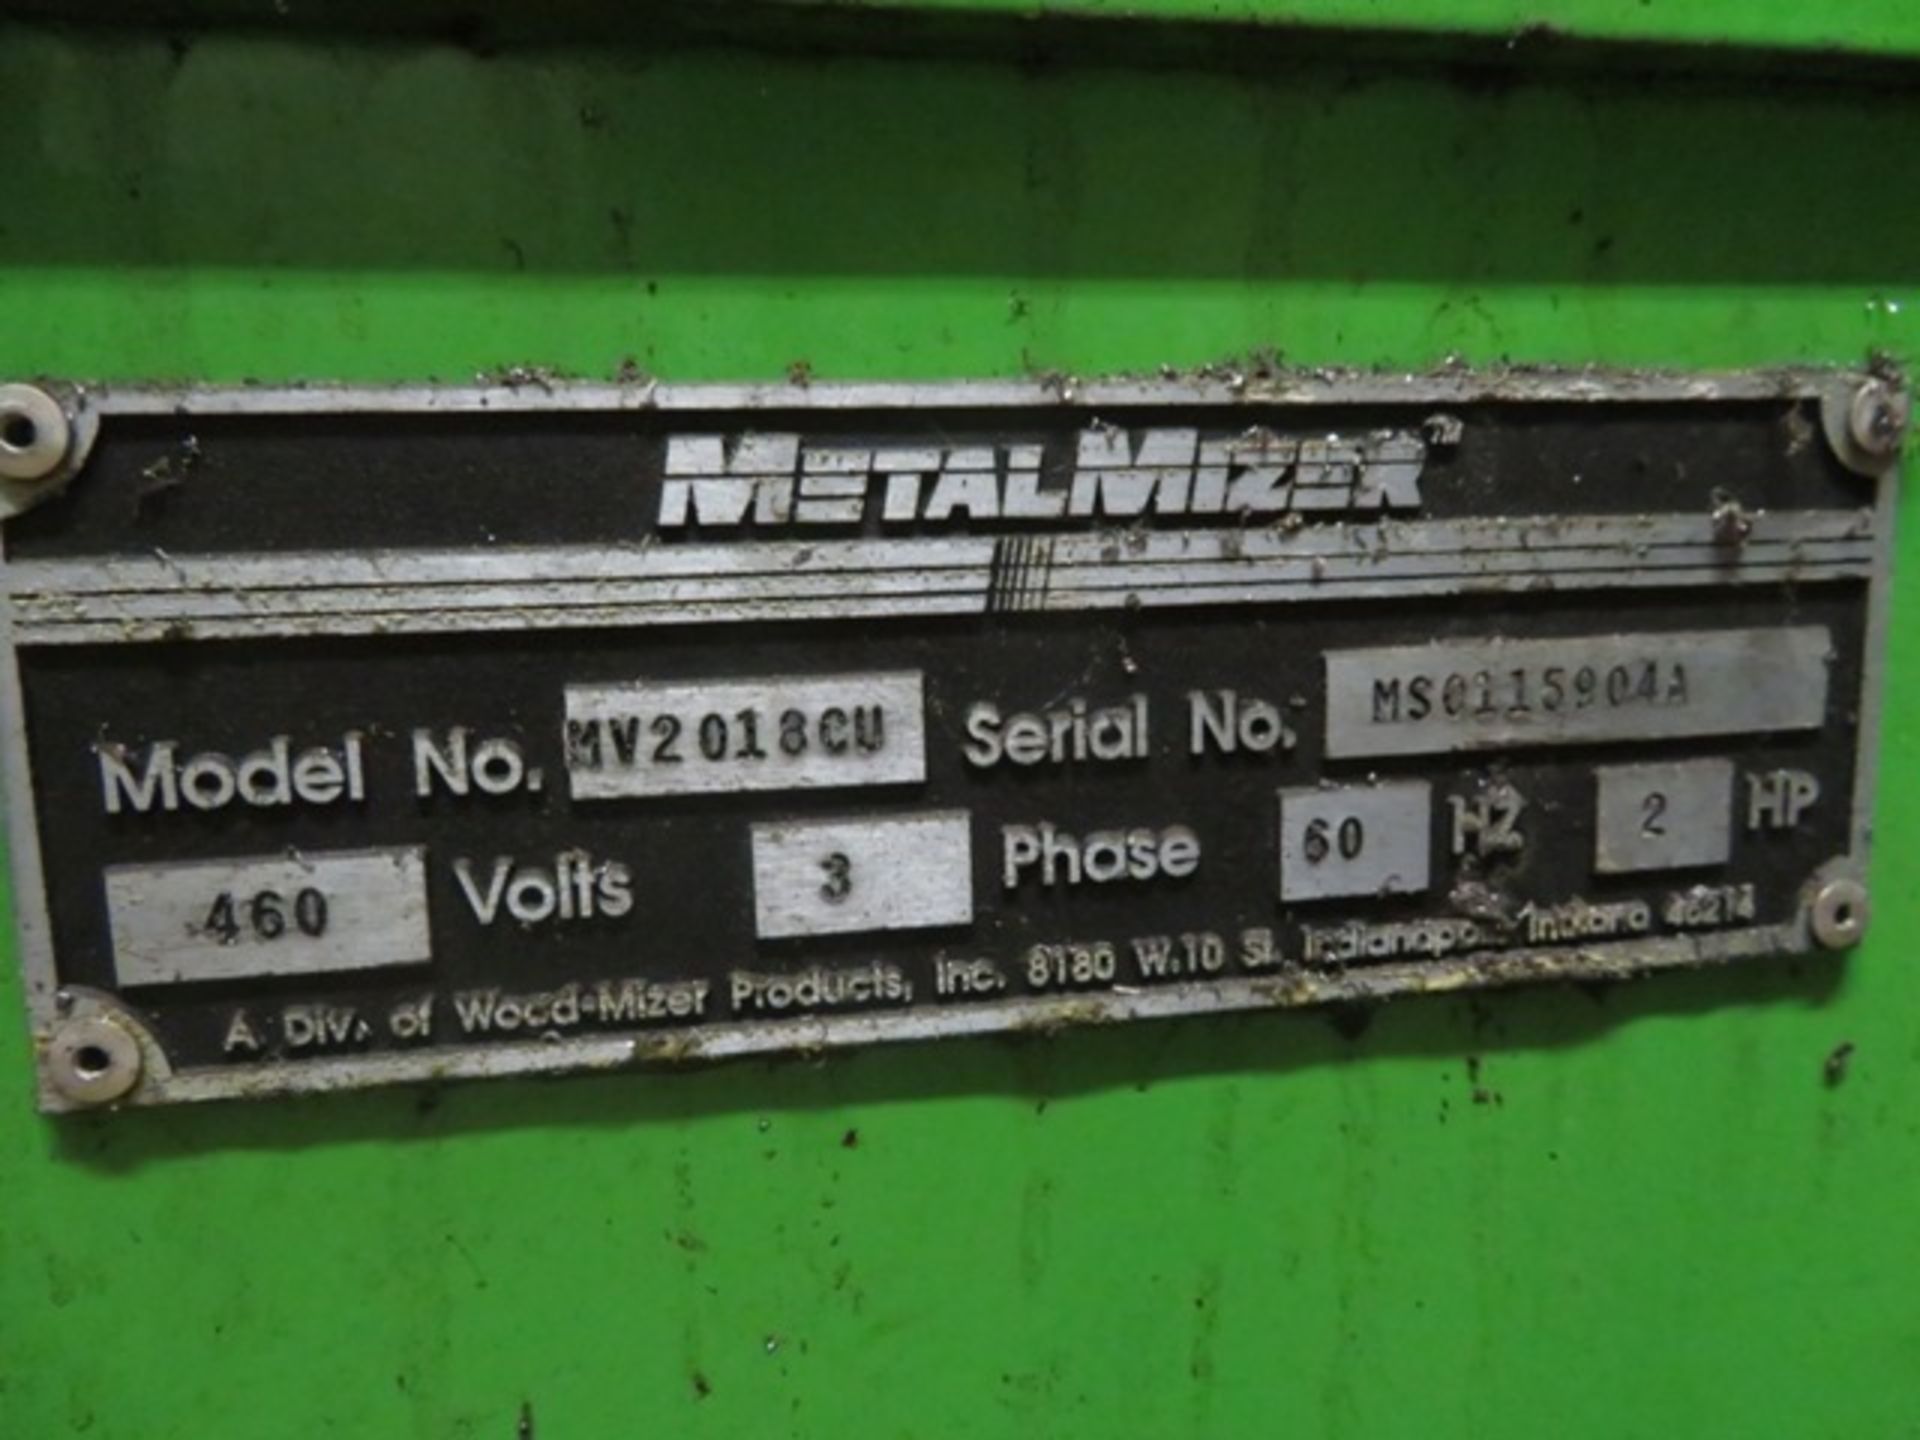 Metal Mizer Mdl. MV2018 Vertical Bandsaw, 460 Volts, 3 Phase, 2 hp, S/N MS0115904A - Image 3 of 5